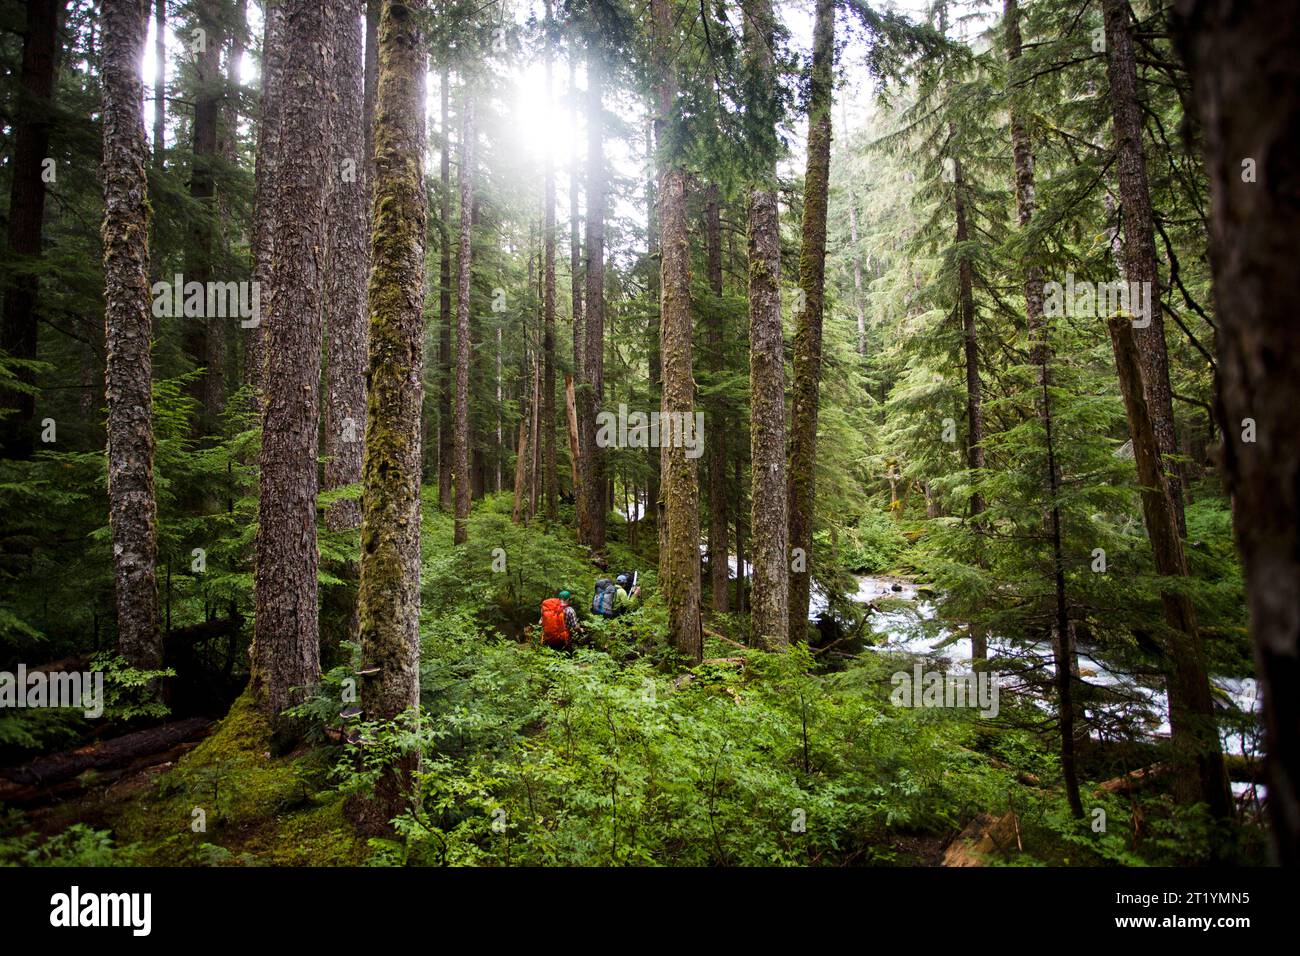 Hikers ascend a trail in a thick, green forest en route to Mt. Redoubt in Washington's North Cascades National Park. Stock Photo